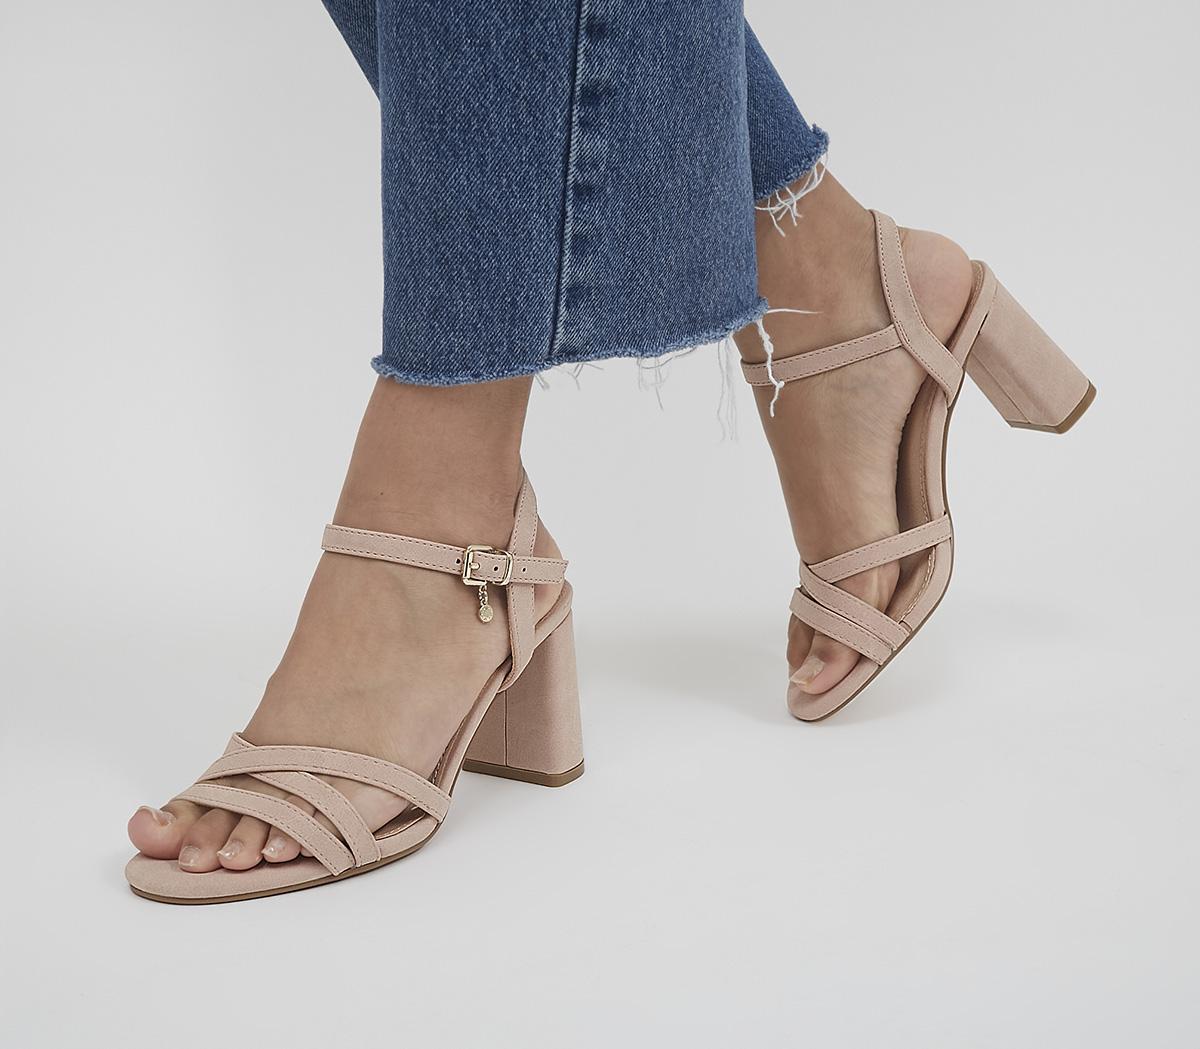 Naked Strappy Sandals Uk